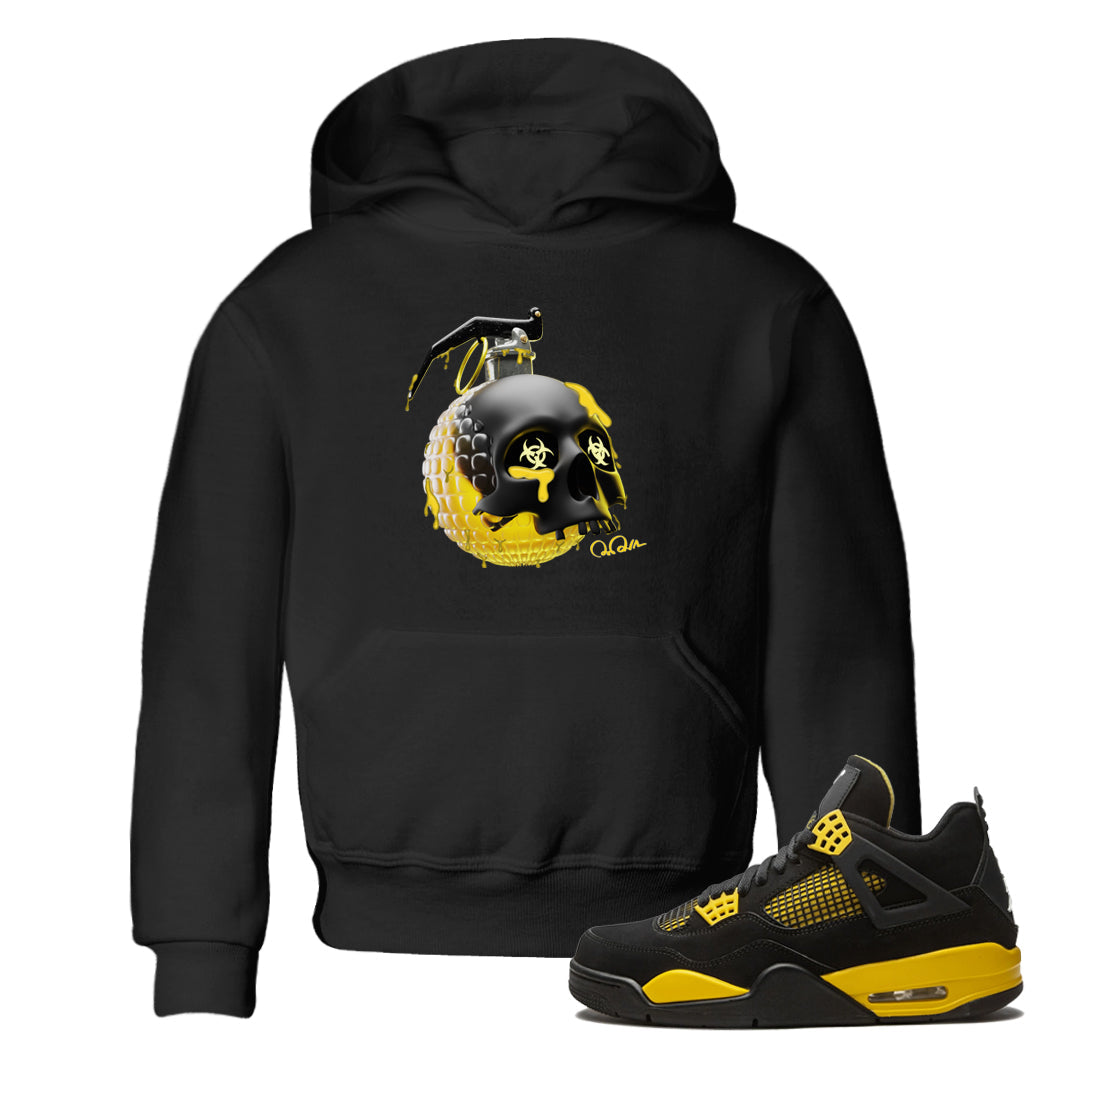 Air Jordan 4 Thunder Skull Bomb Baby and Kids Sneaker Tees AJ4 Thunder JumpmanKids Sneaker Tees Washing and Care Tip